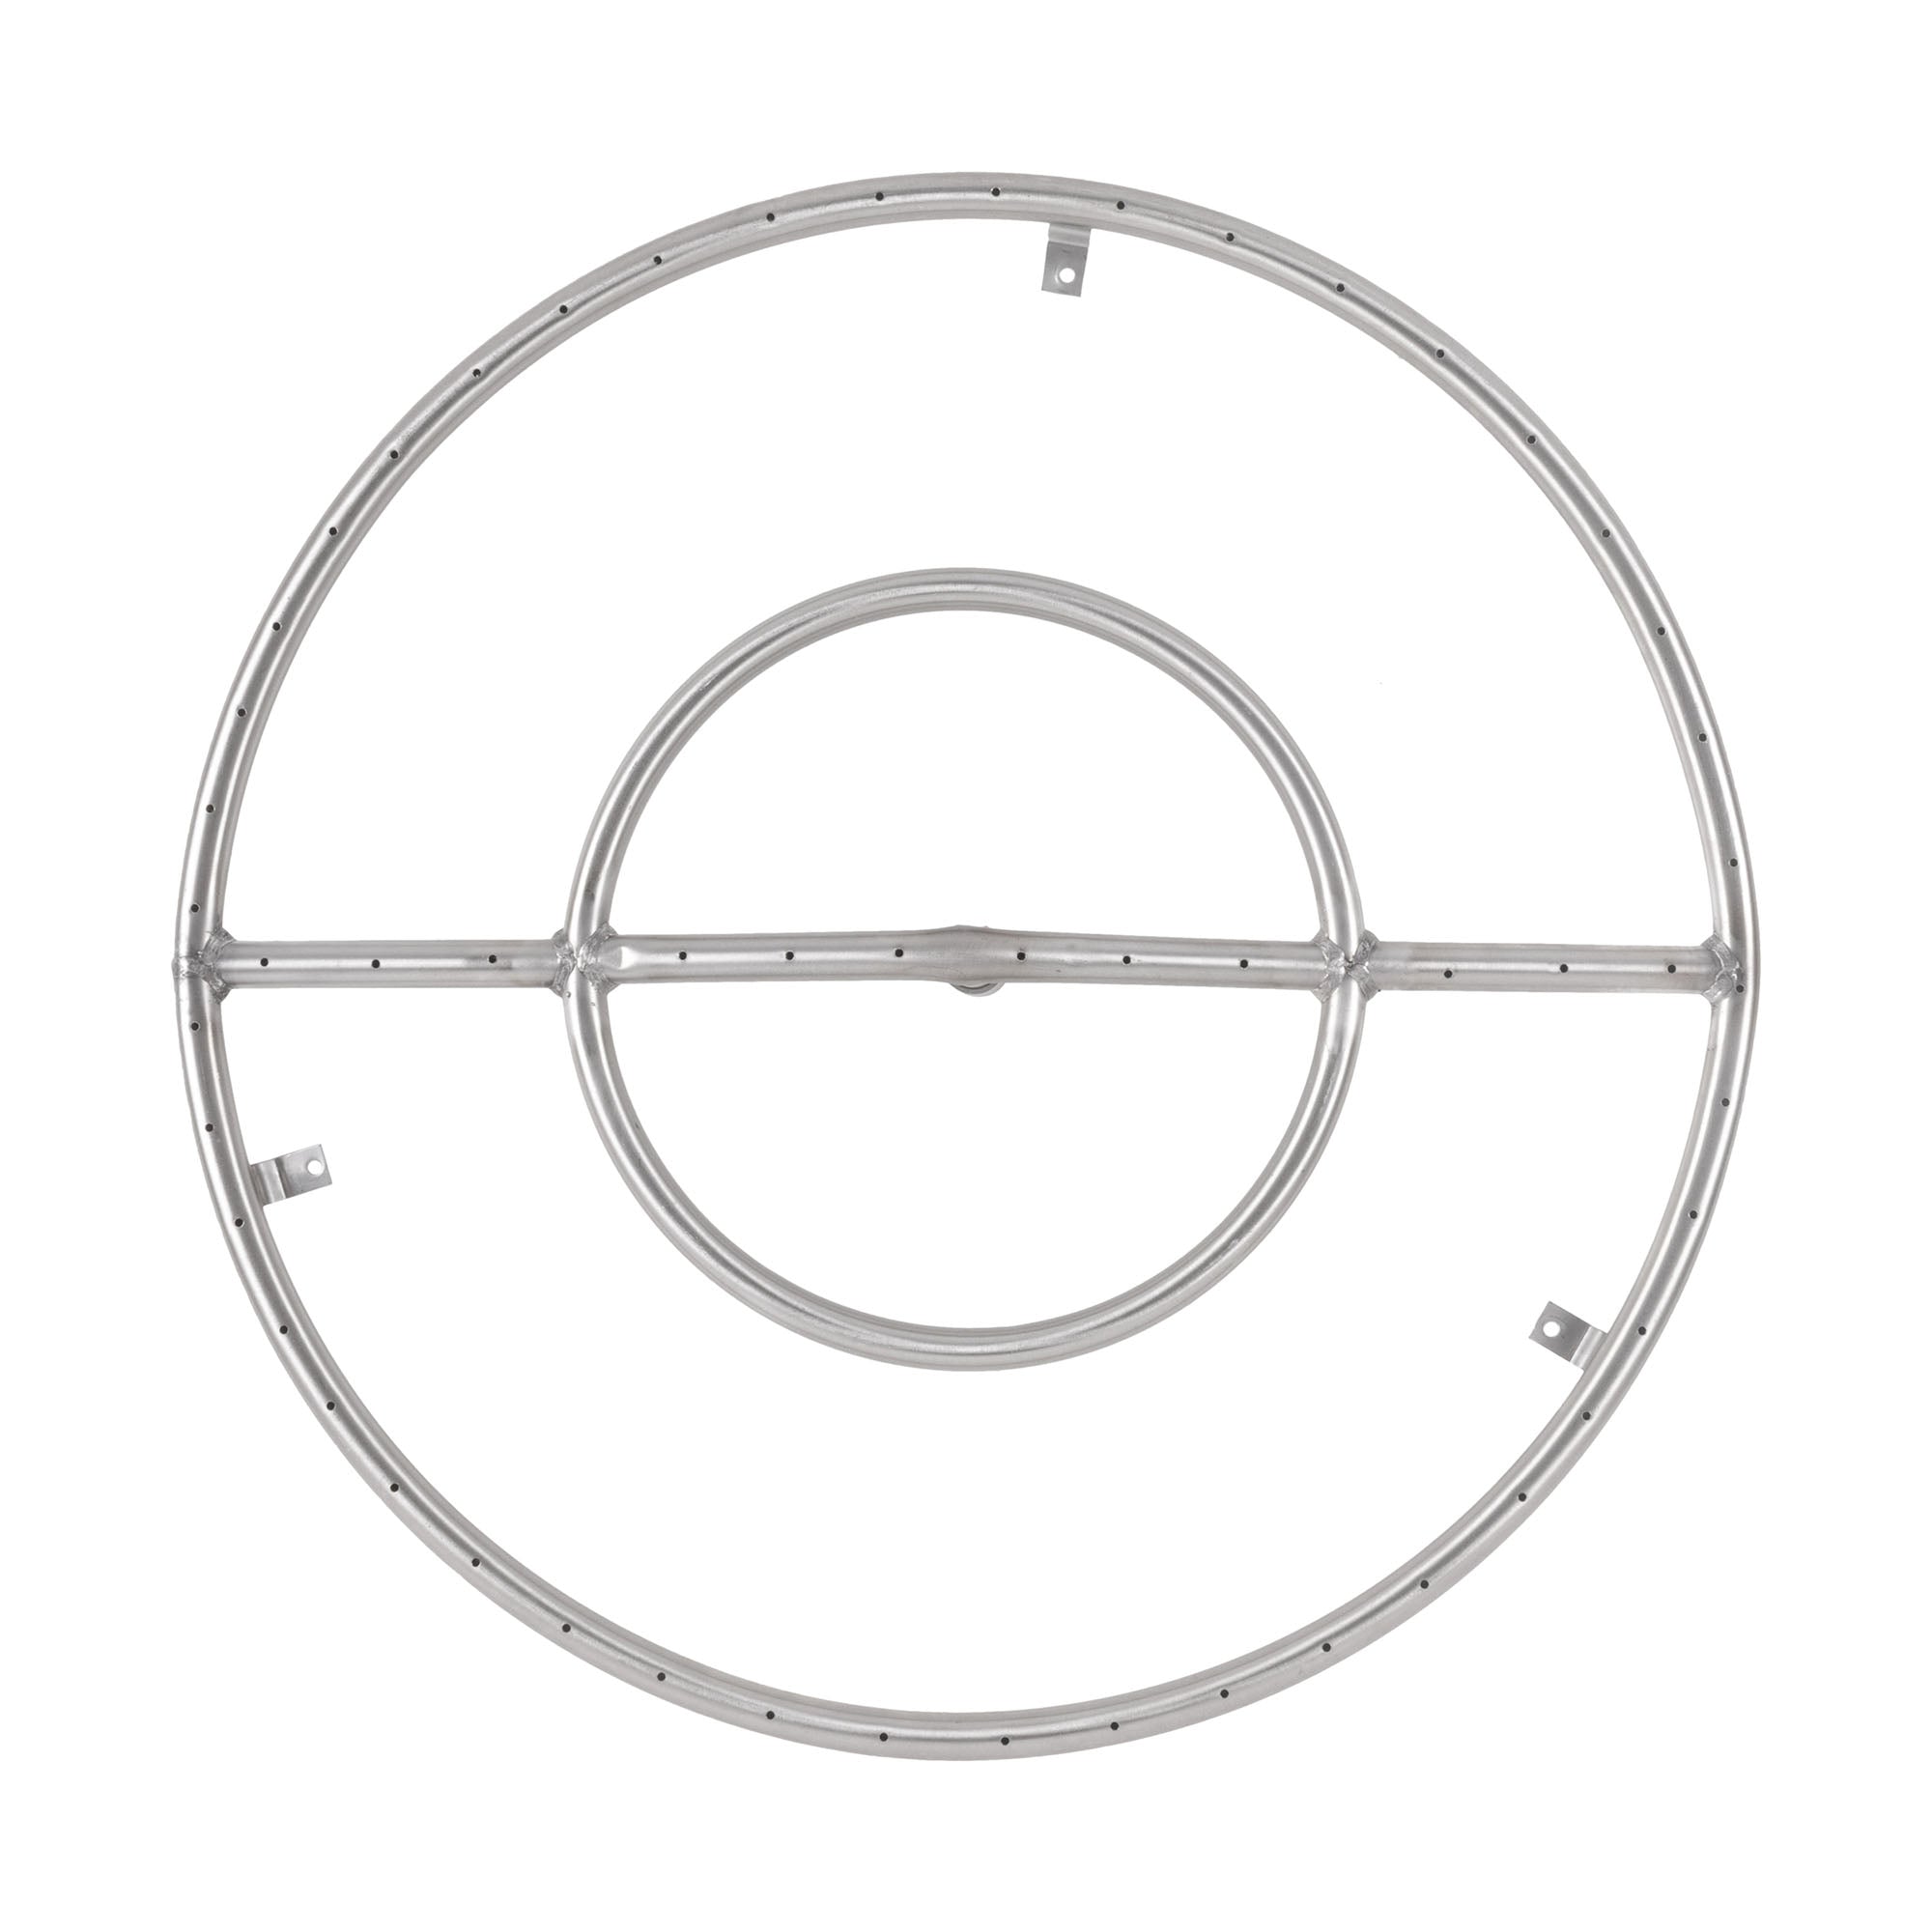 The Outdoor Plus - 48" Round Stainless Steel Burner - OPT-162-48